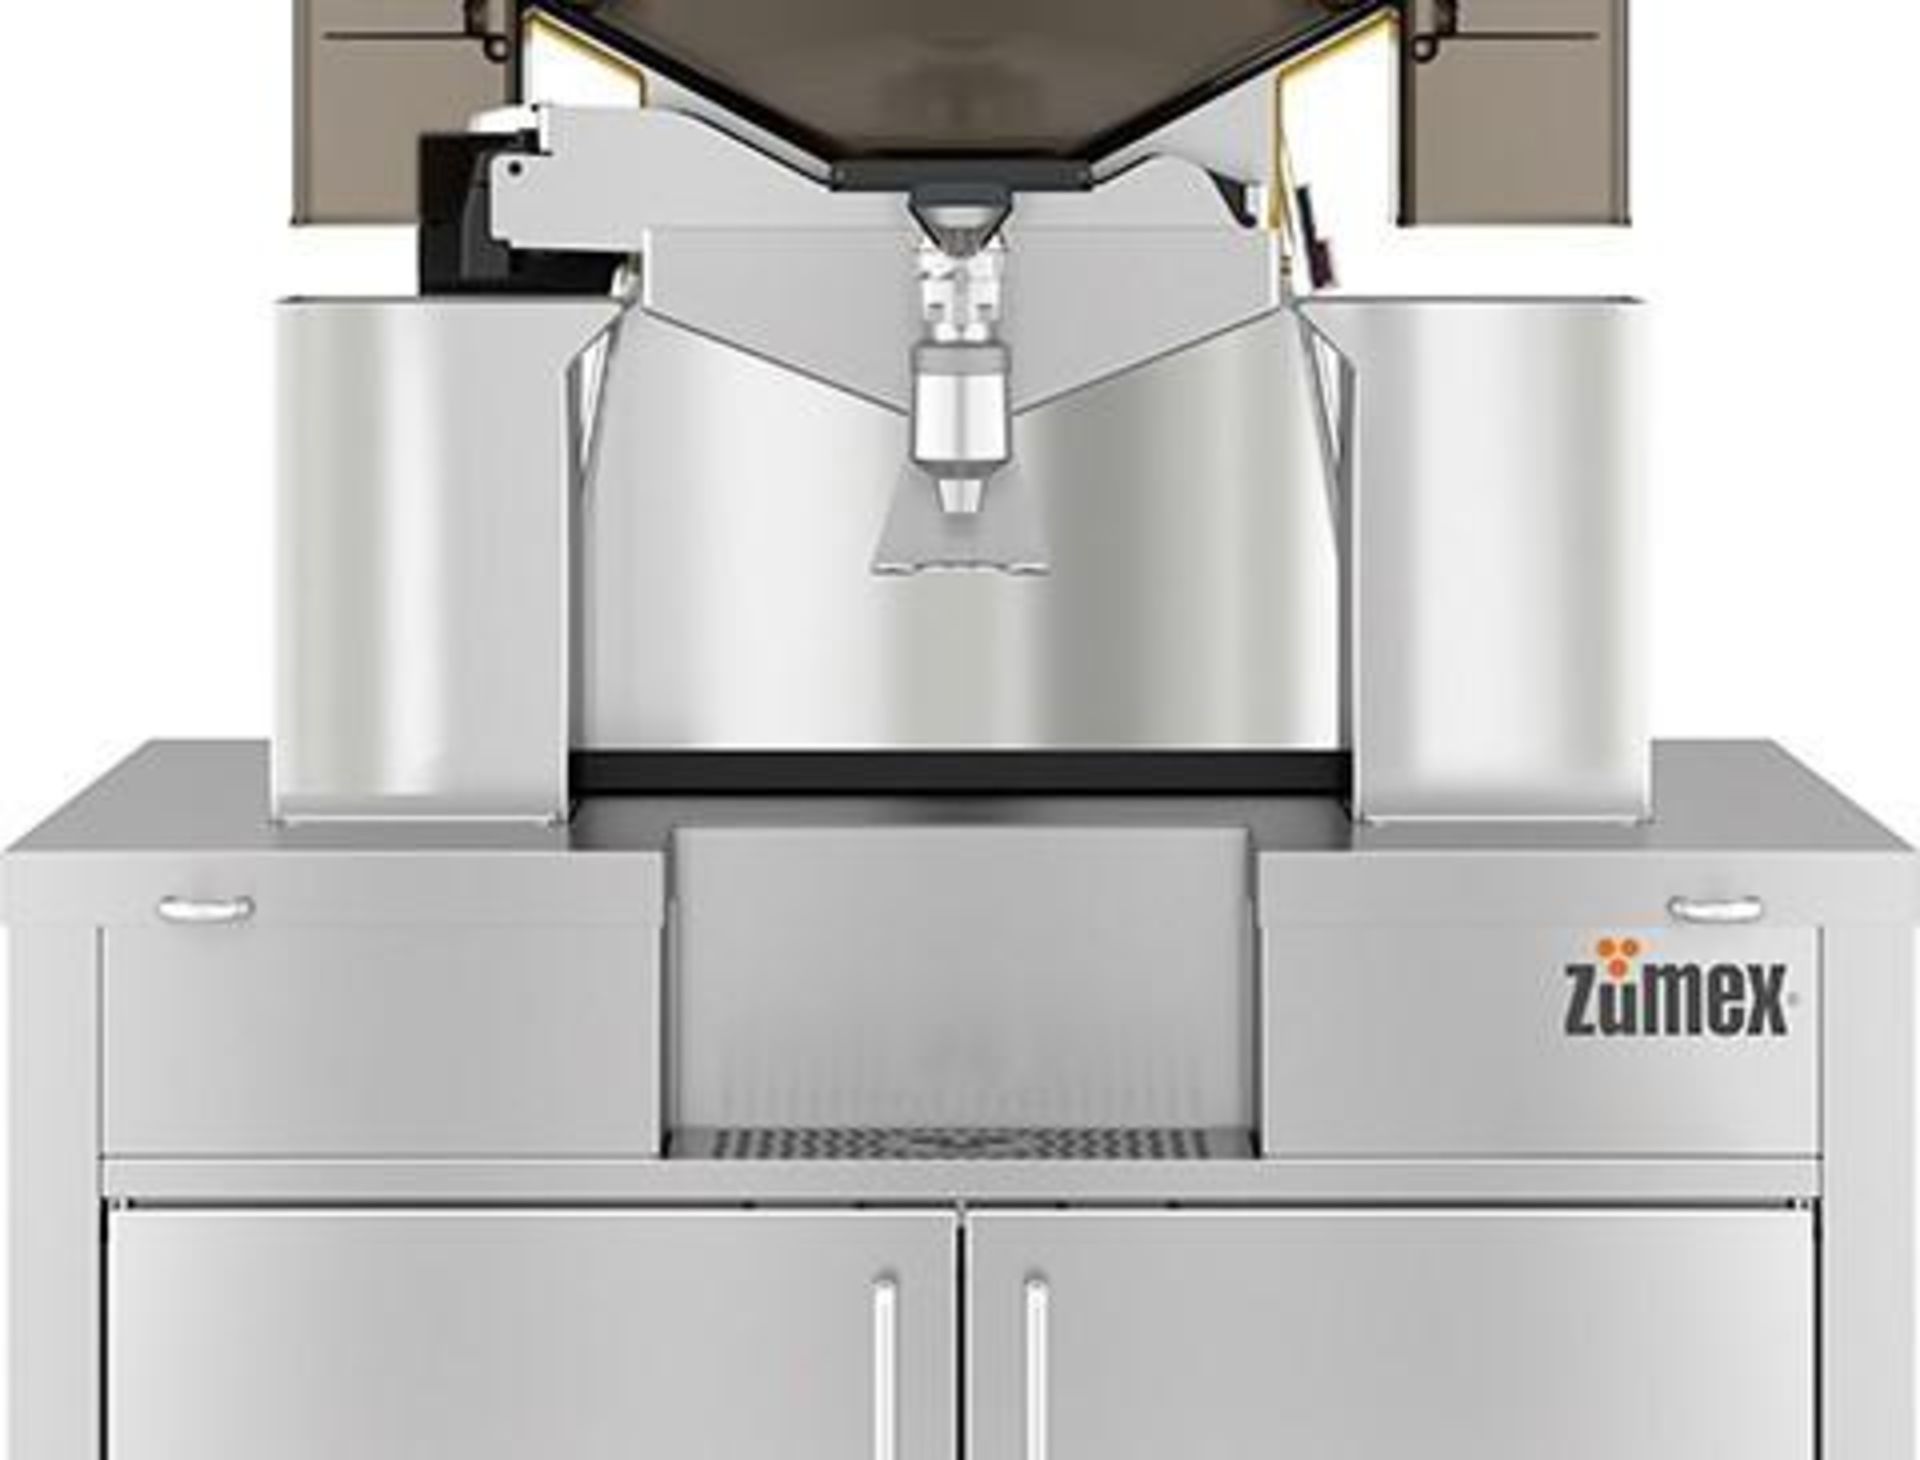 1 x Zumex Speed S +Plus Self-Service Podium Commercial Citrus Juicer - Manufactured in 2018 - Ideal - Image 19 of 21